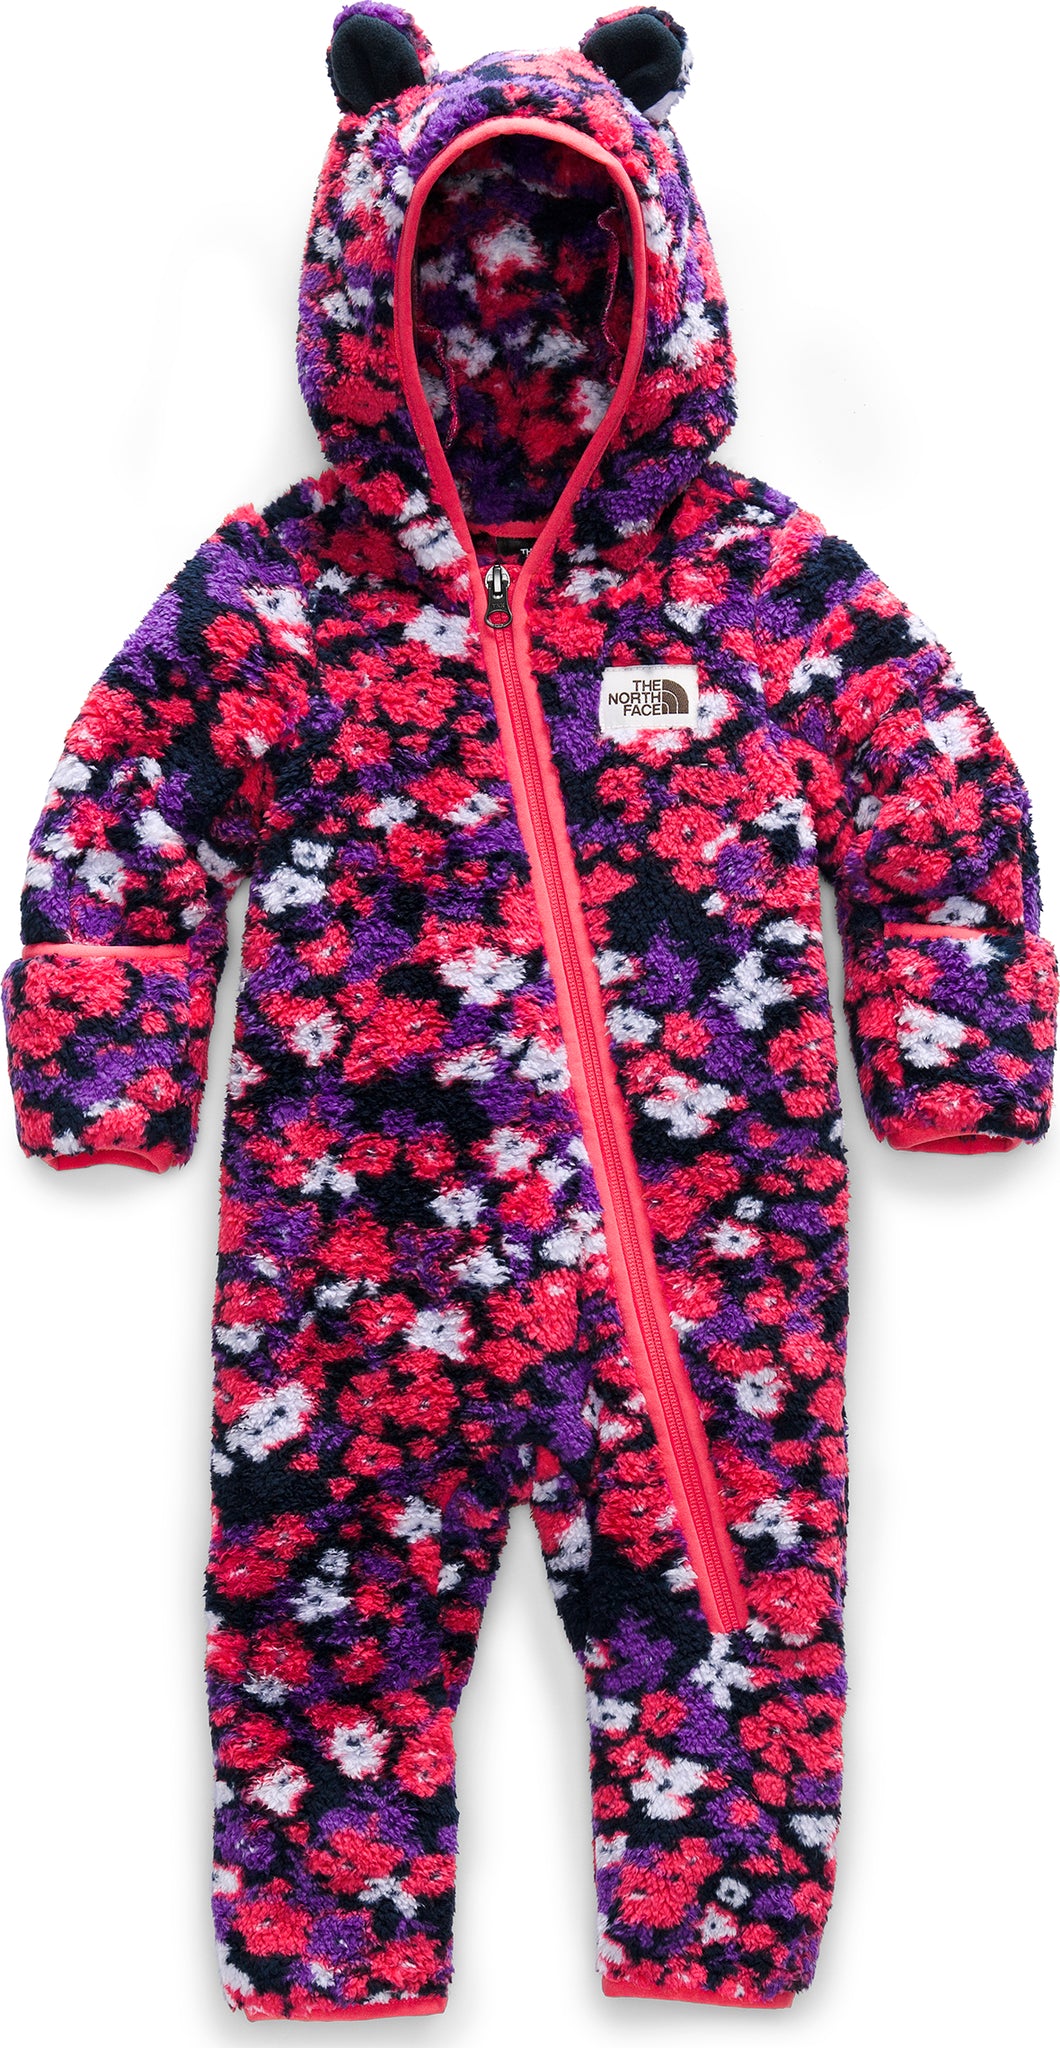 north face baby snowsuit uk